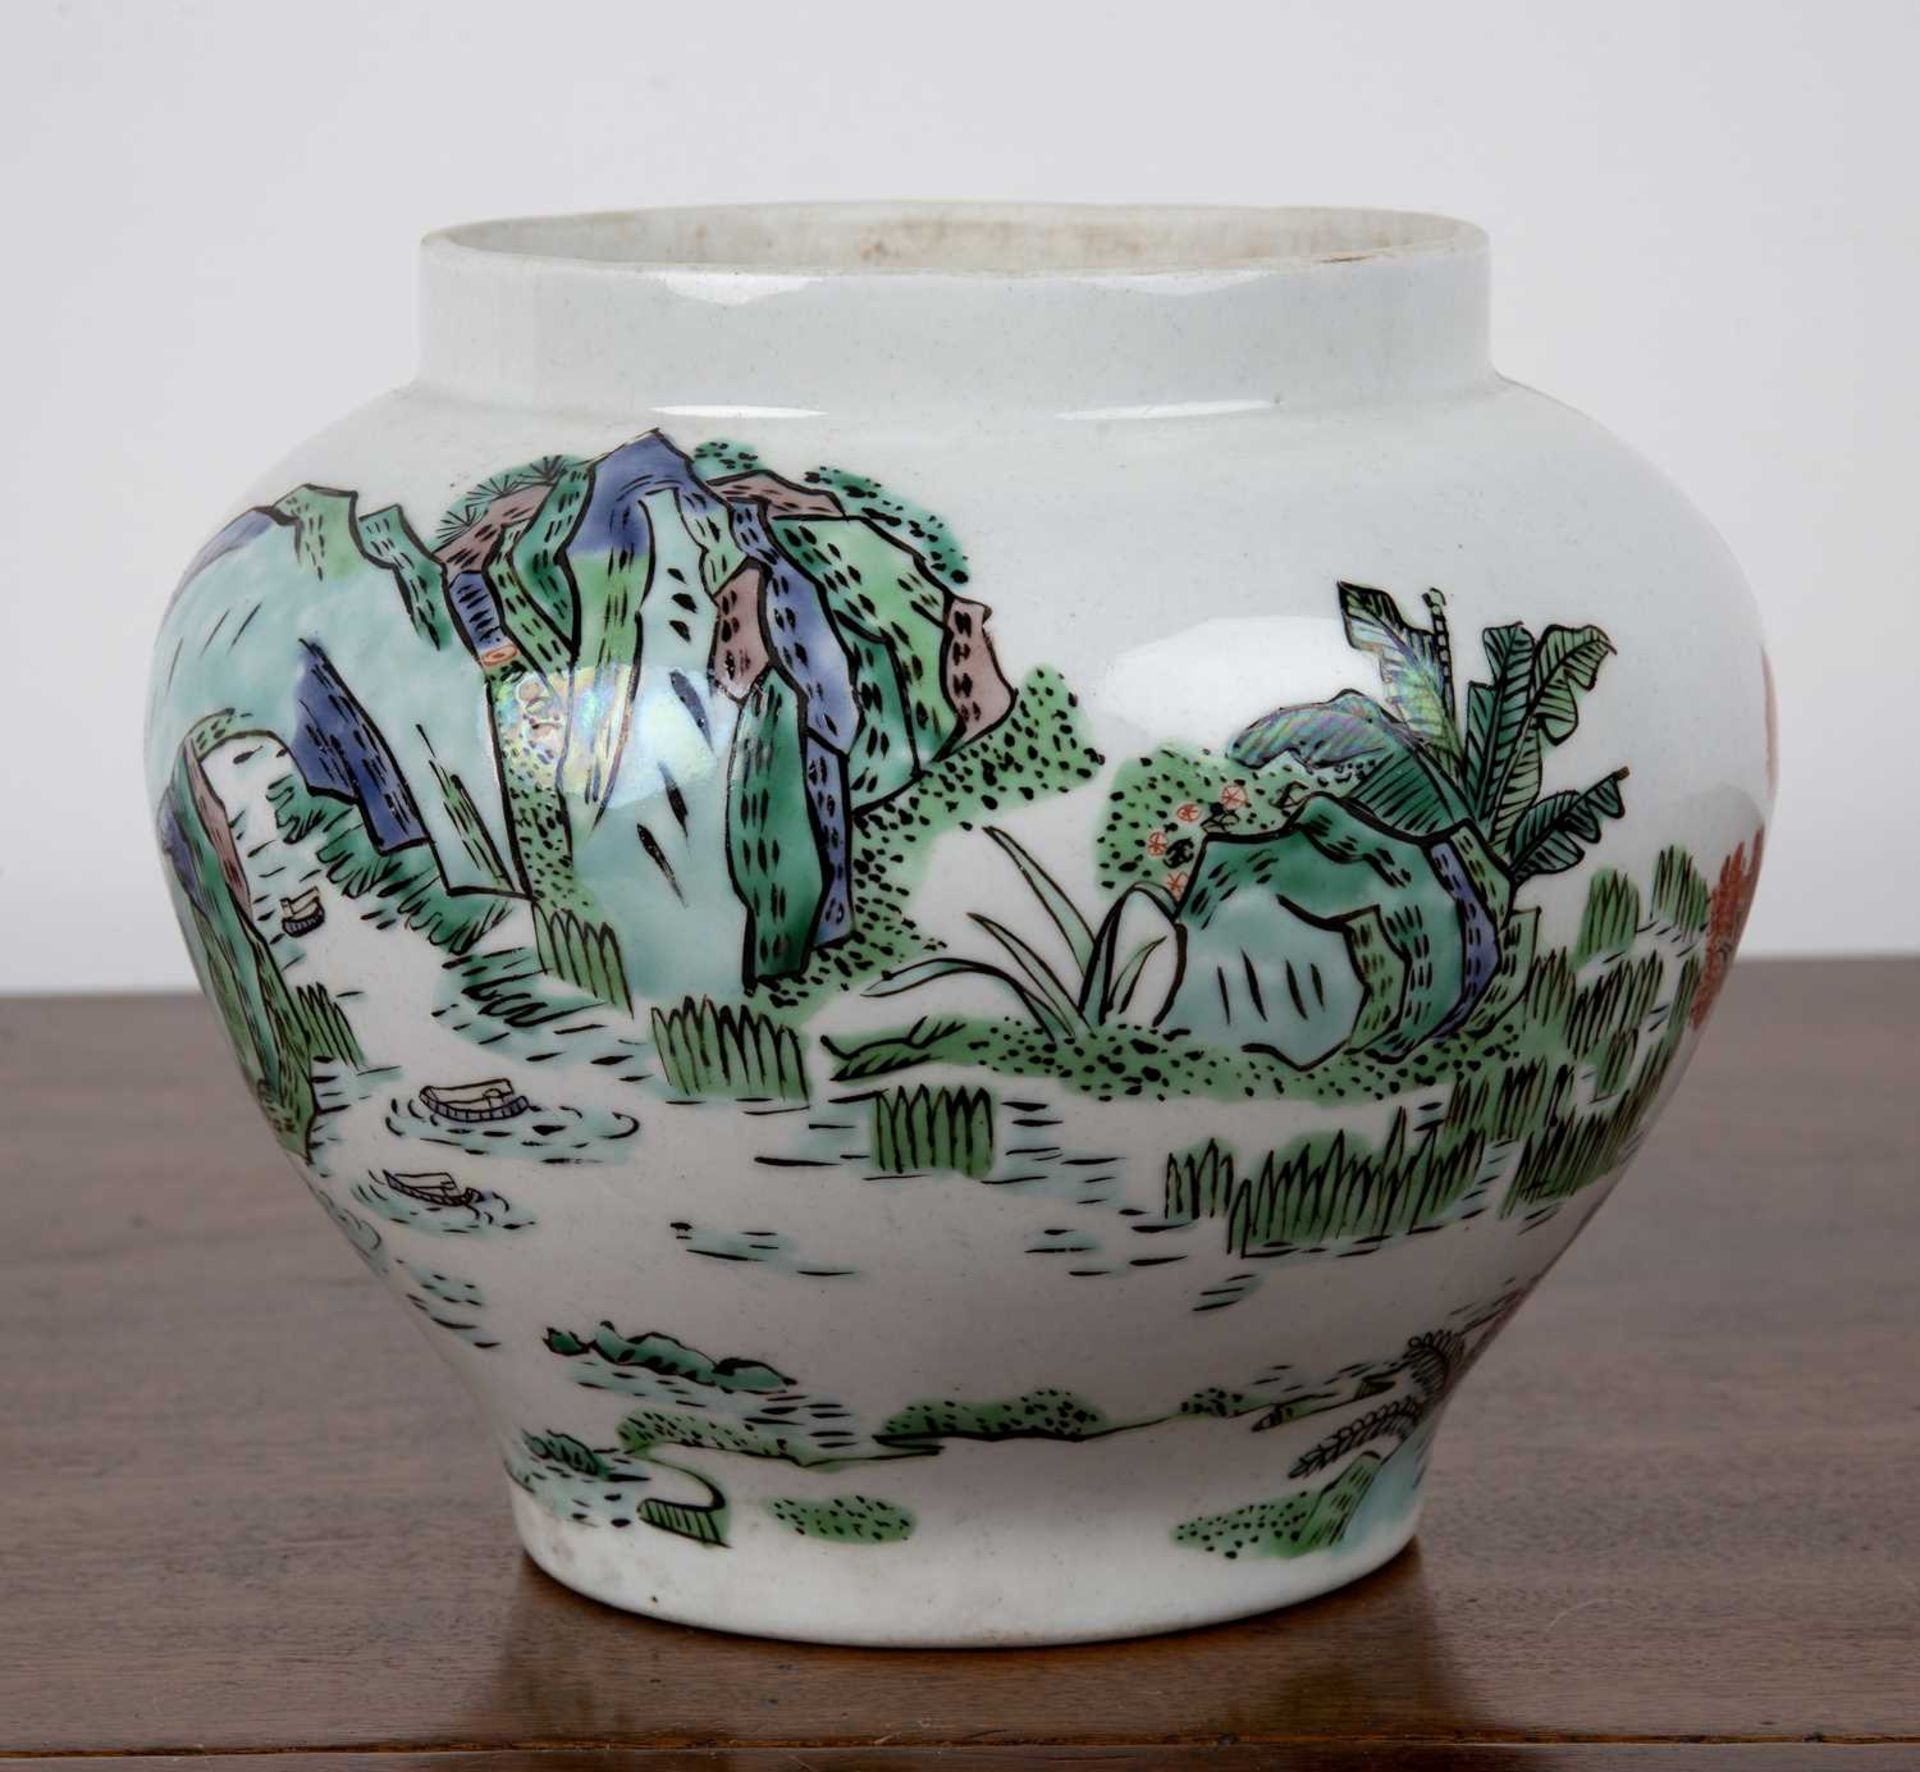 White ground ovoid porcelain vase Chinese, painted with scholars and figures fishing, 17.5cm high - Image 2 of 3